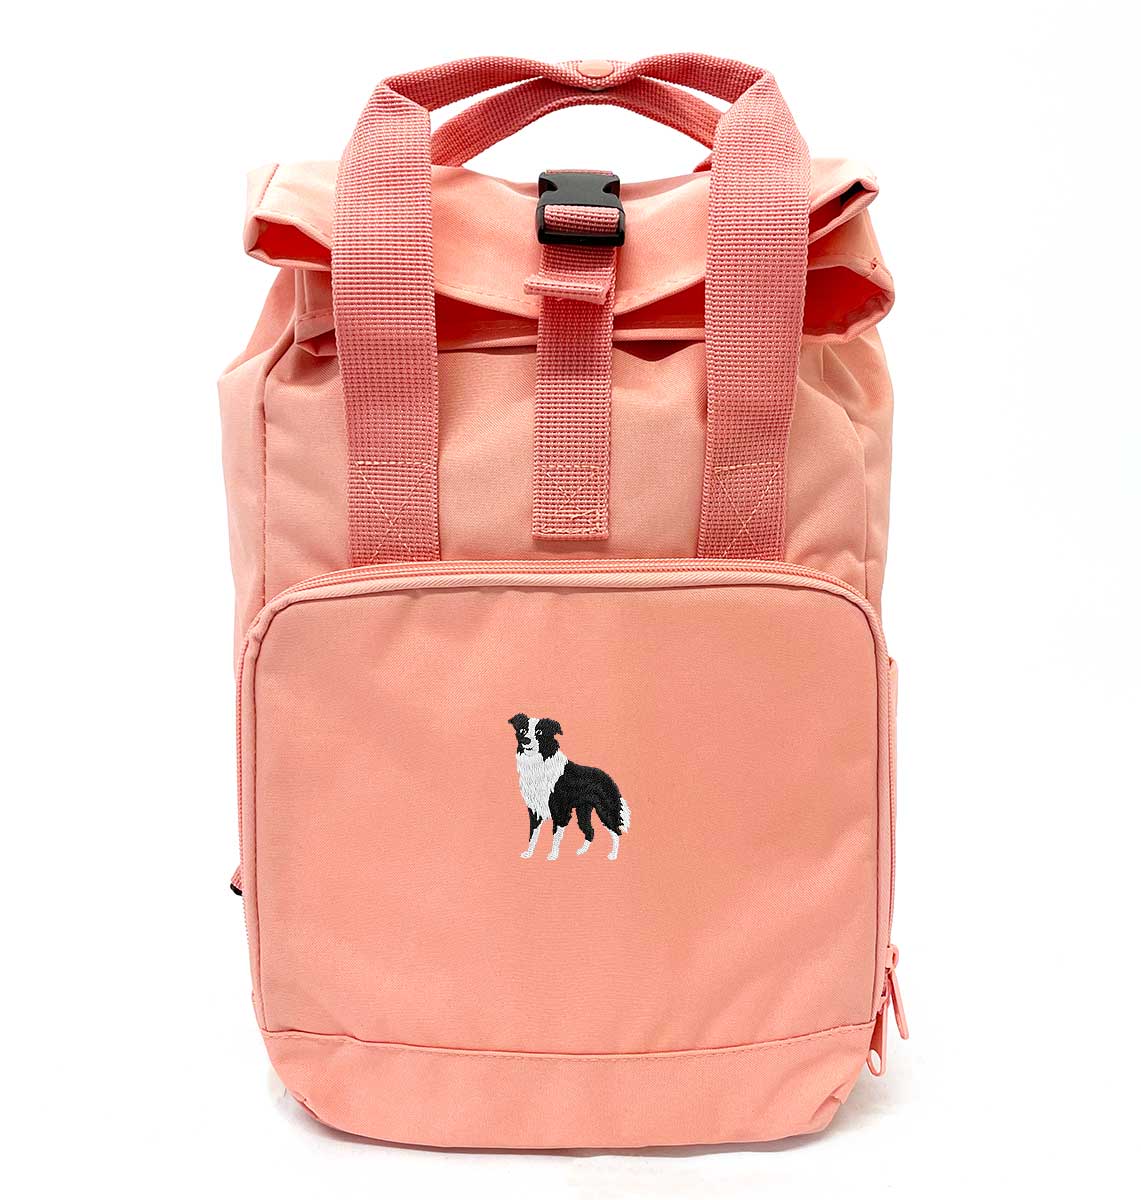 Collie Dog Mini Roll-top Recycled Backpack - Blue Panda